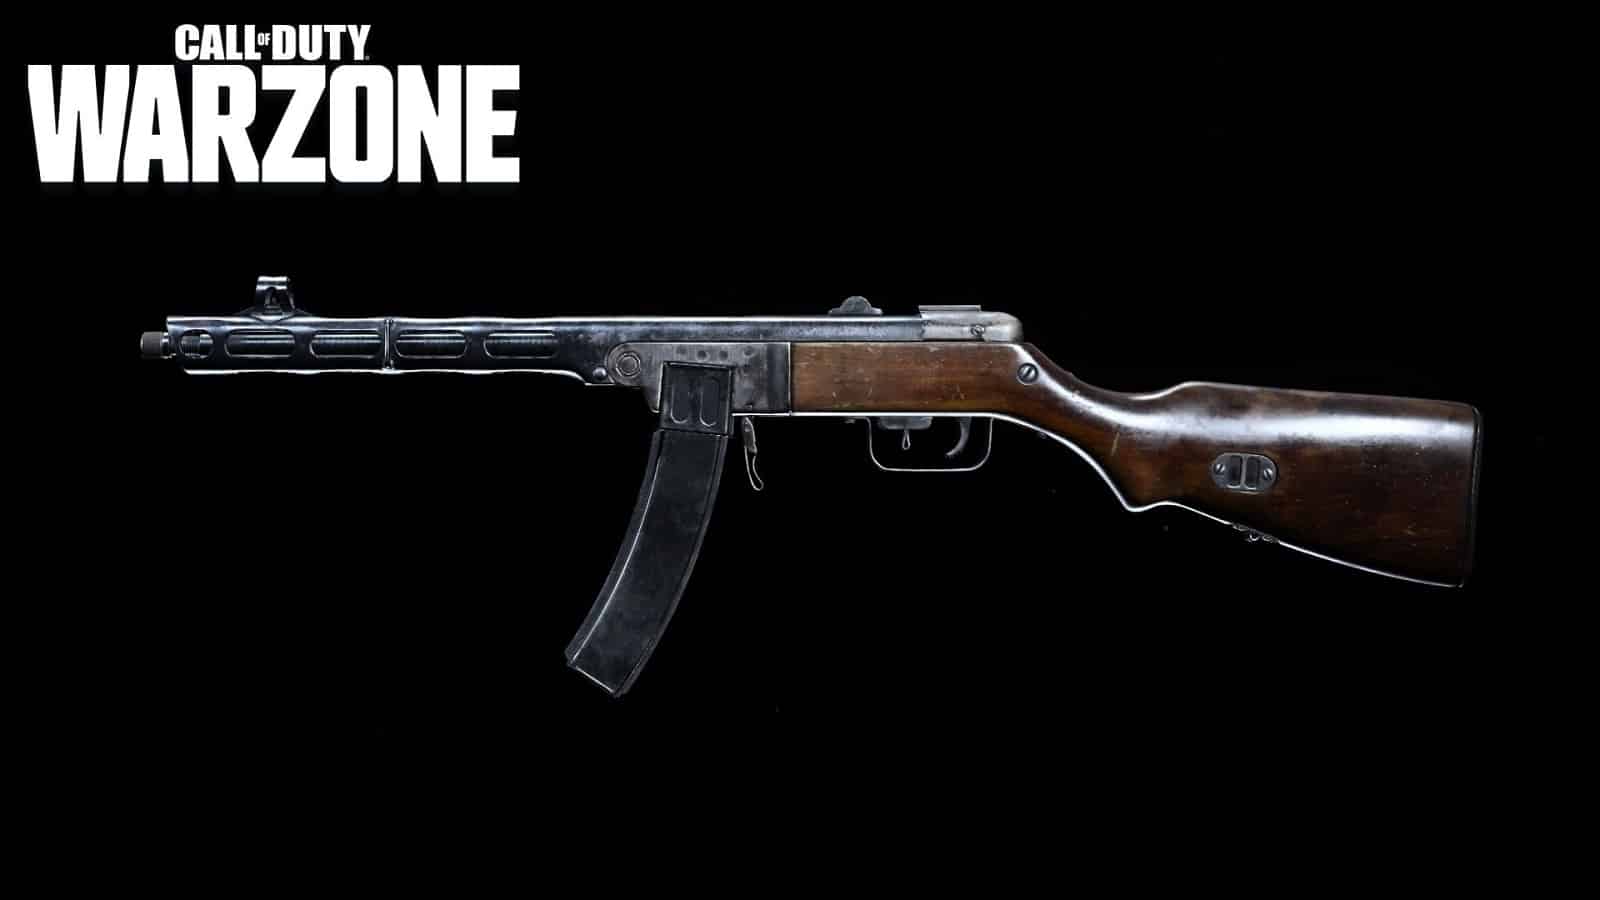 An image of the PPSH-41 with the Warzone logo in the corner